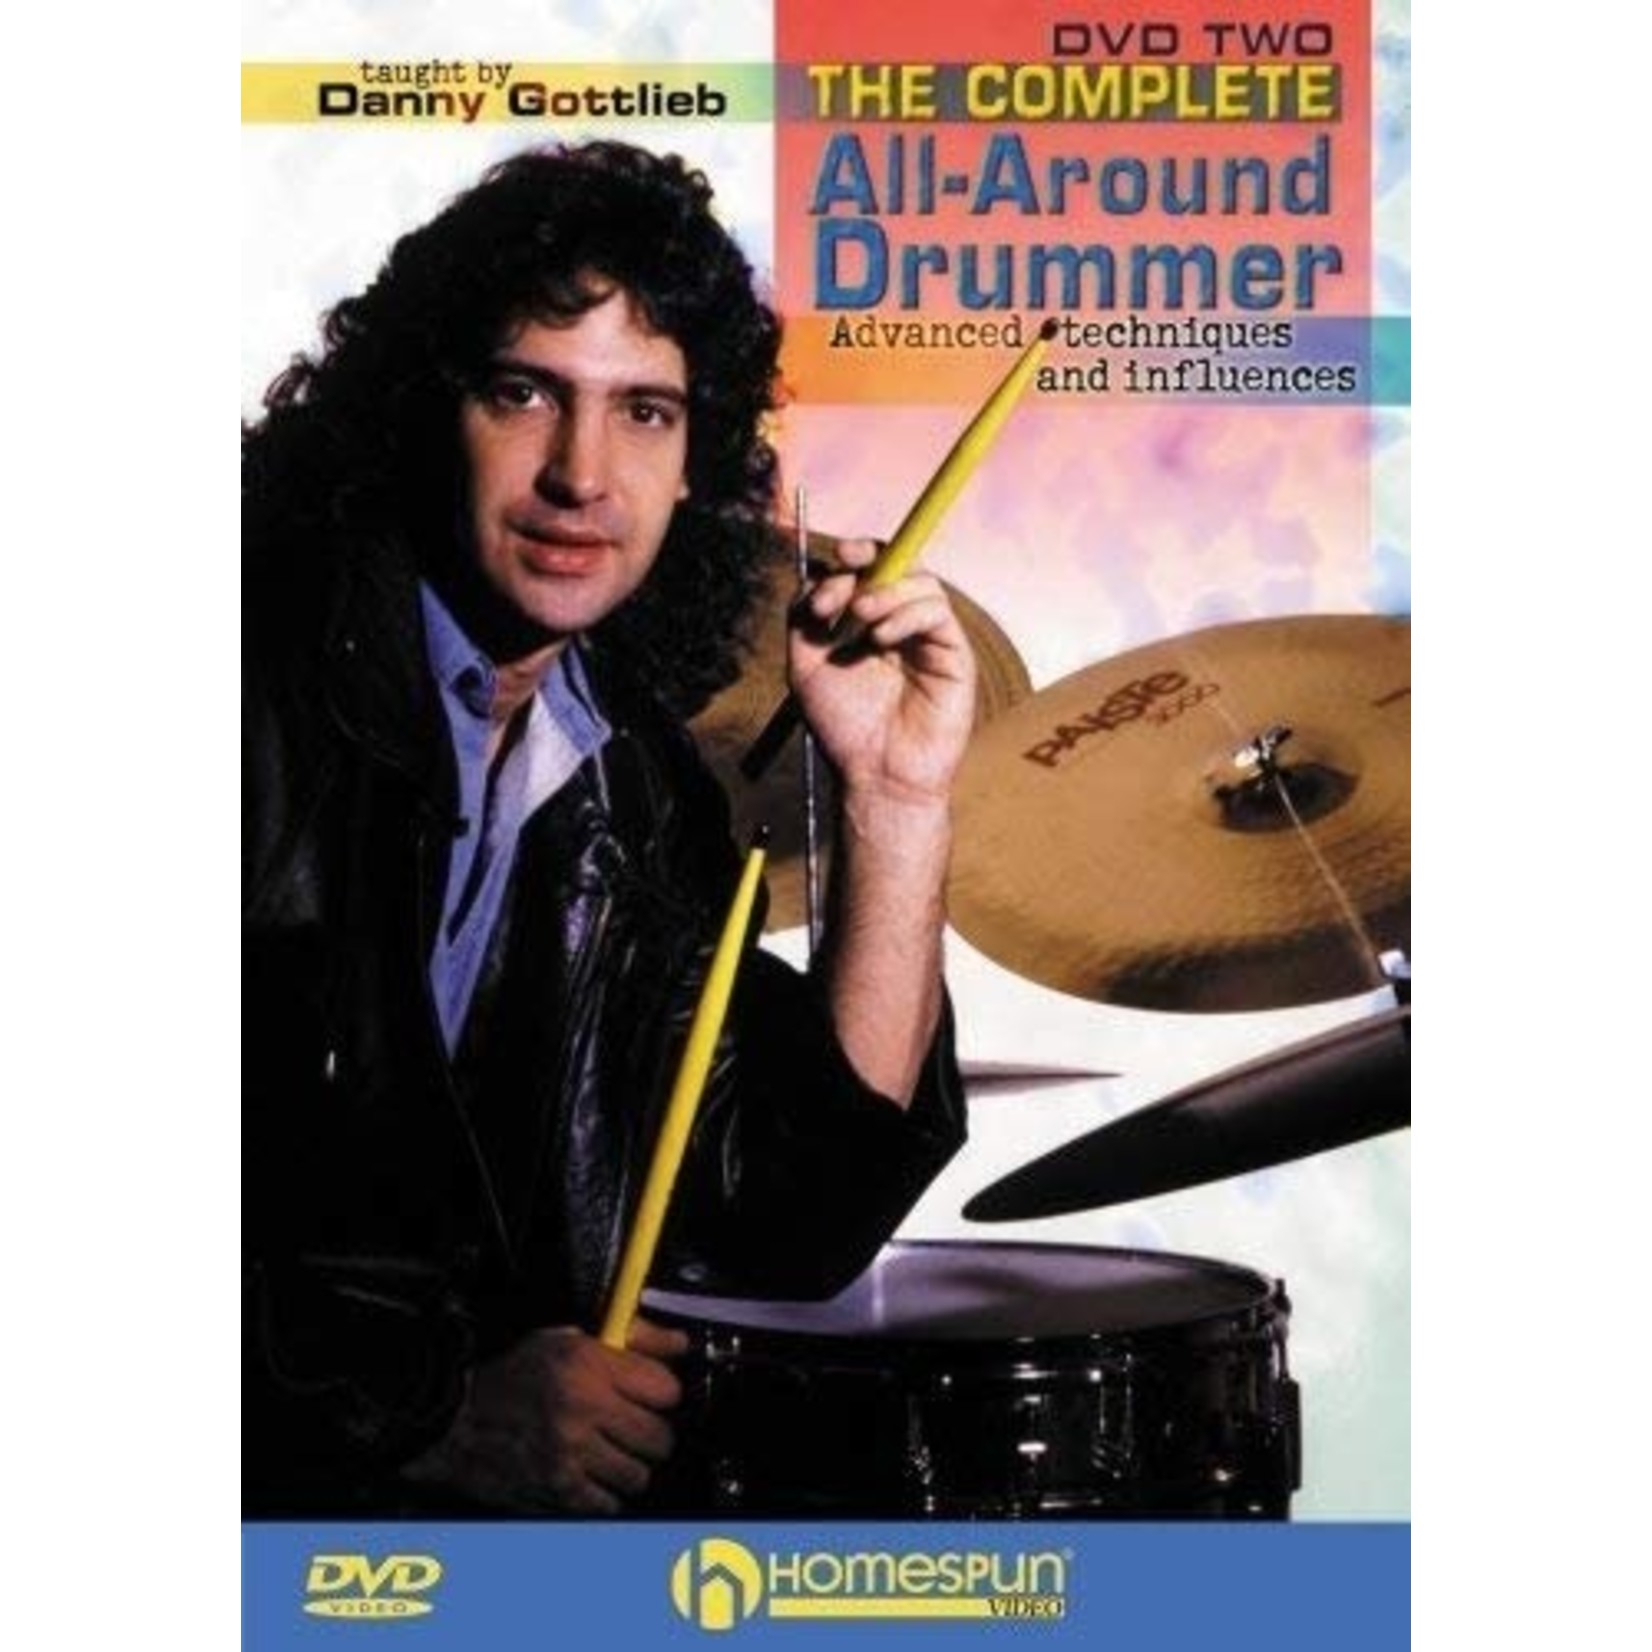 The Complete All-Around Drummer DVD Two by Danny Gottlieb DVD